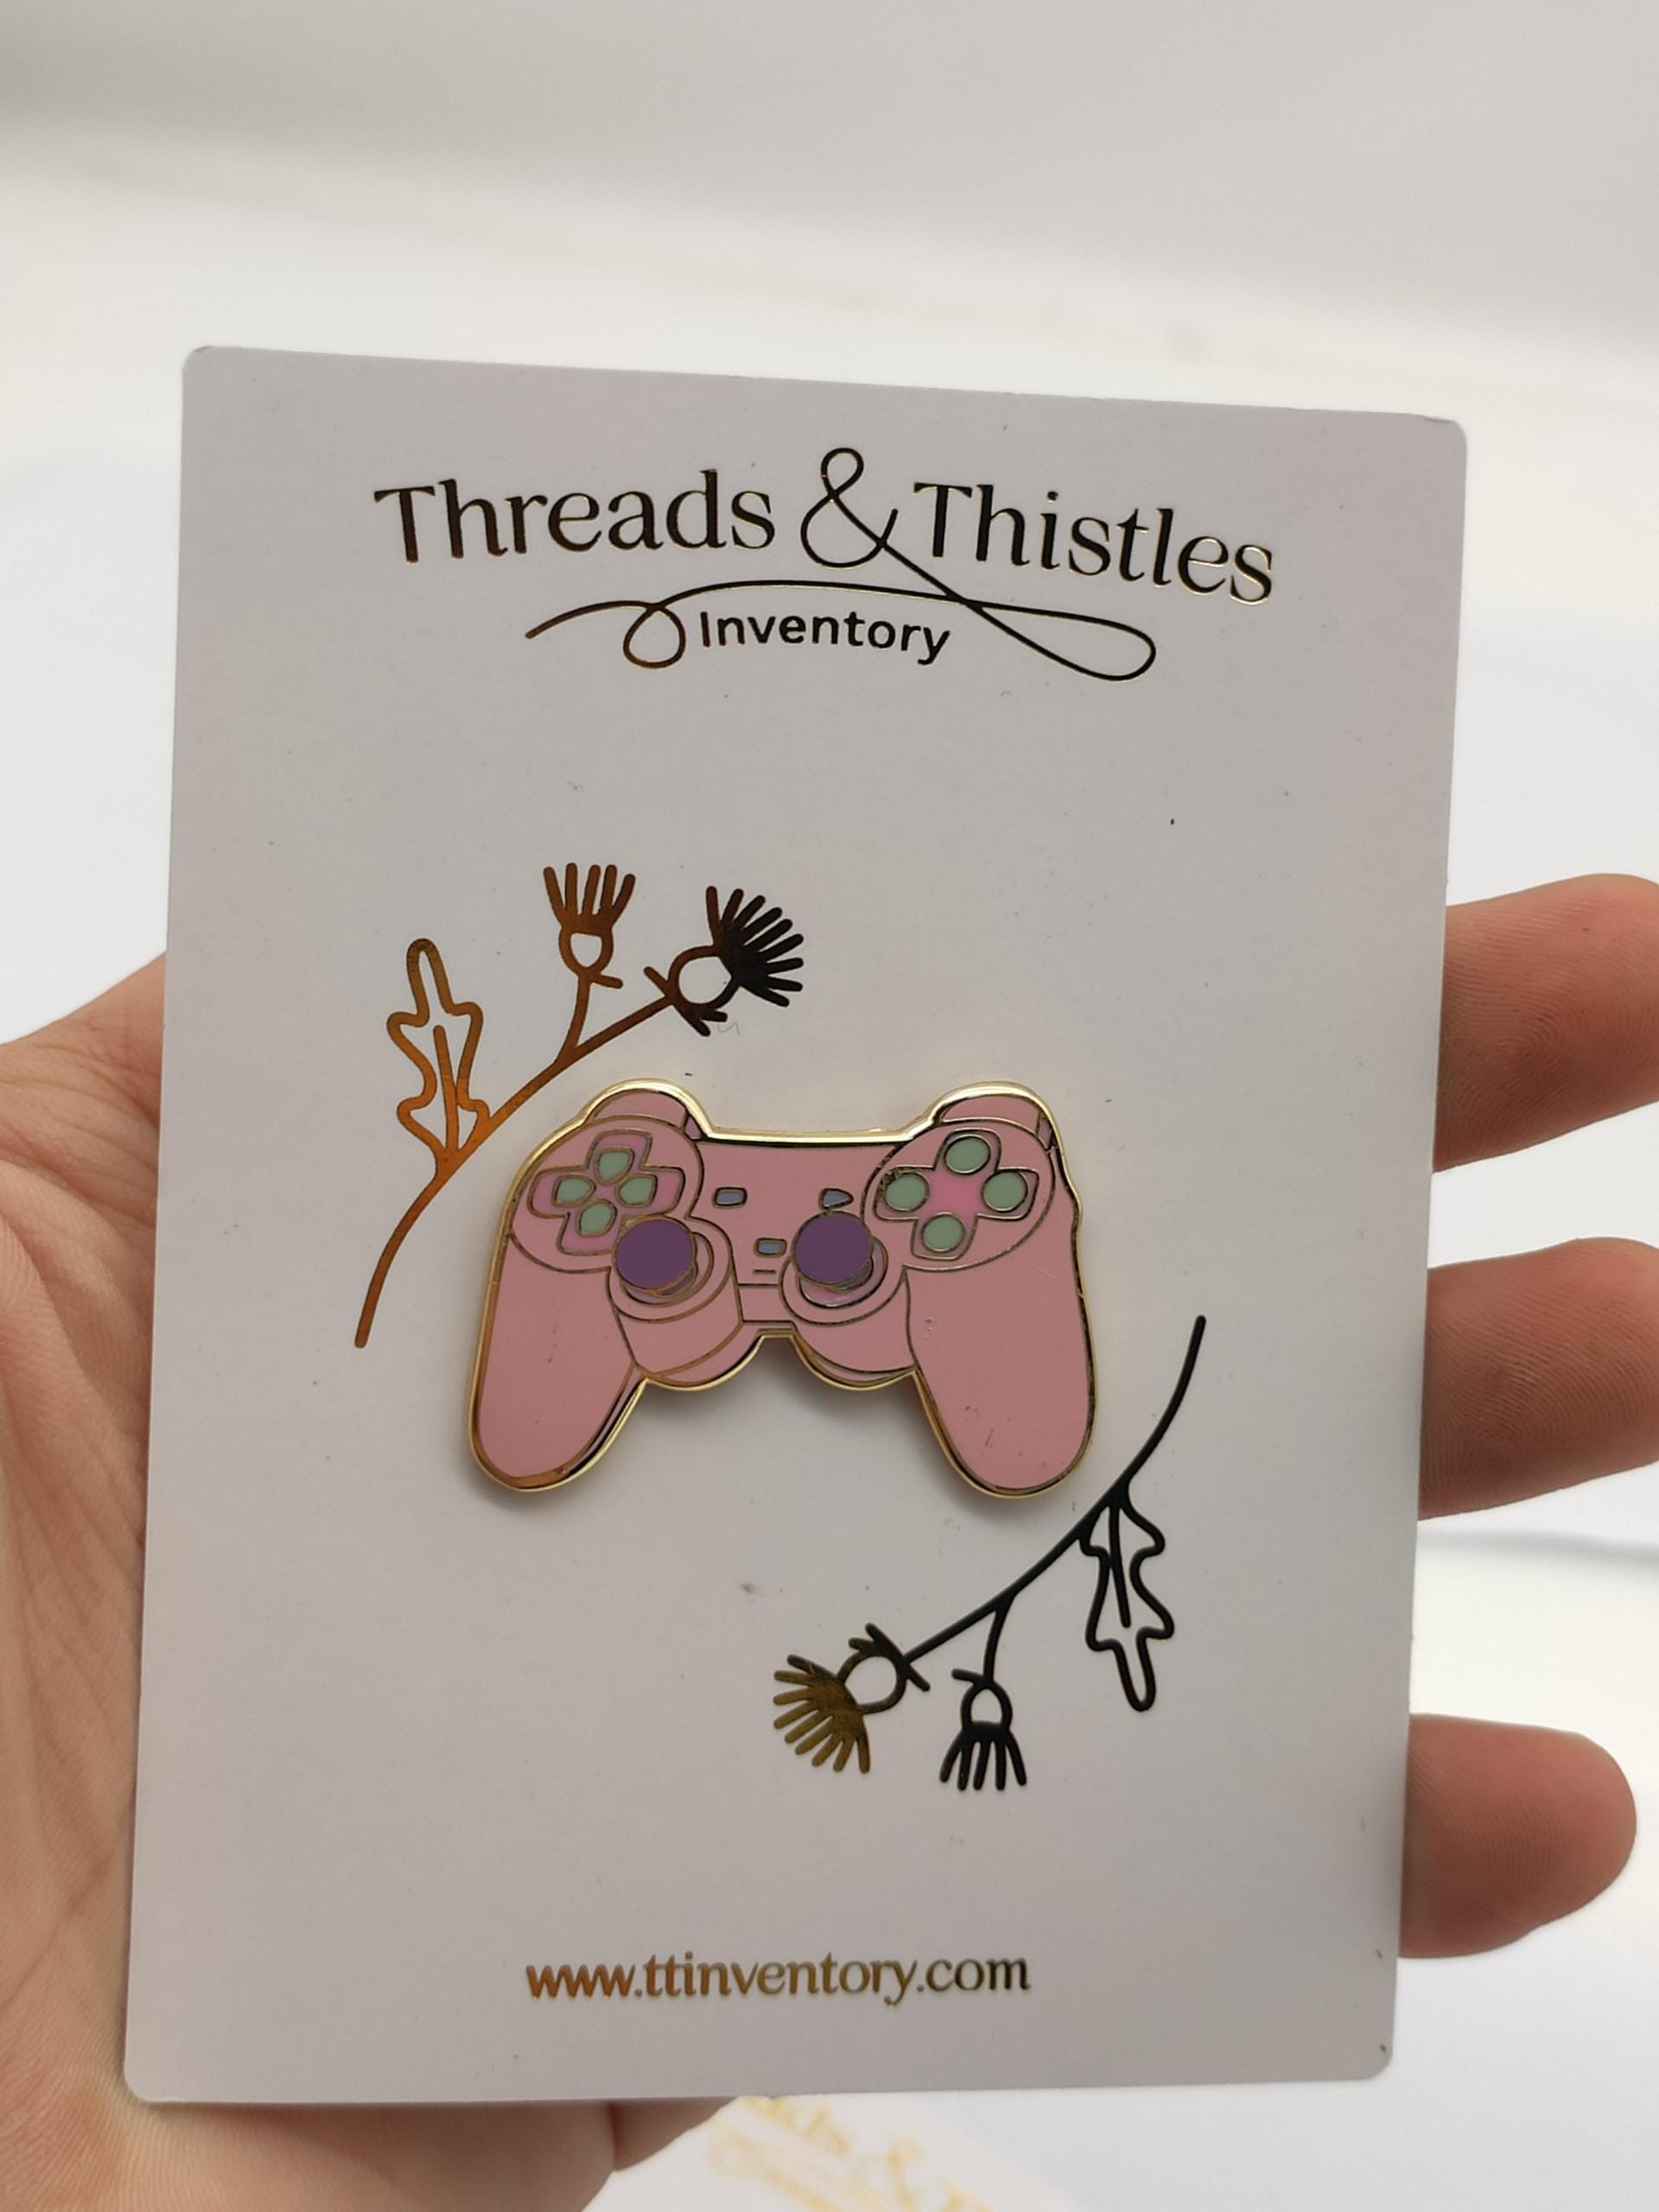 Controller - Enamel Pin Threads & Thistles Inventory 